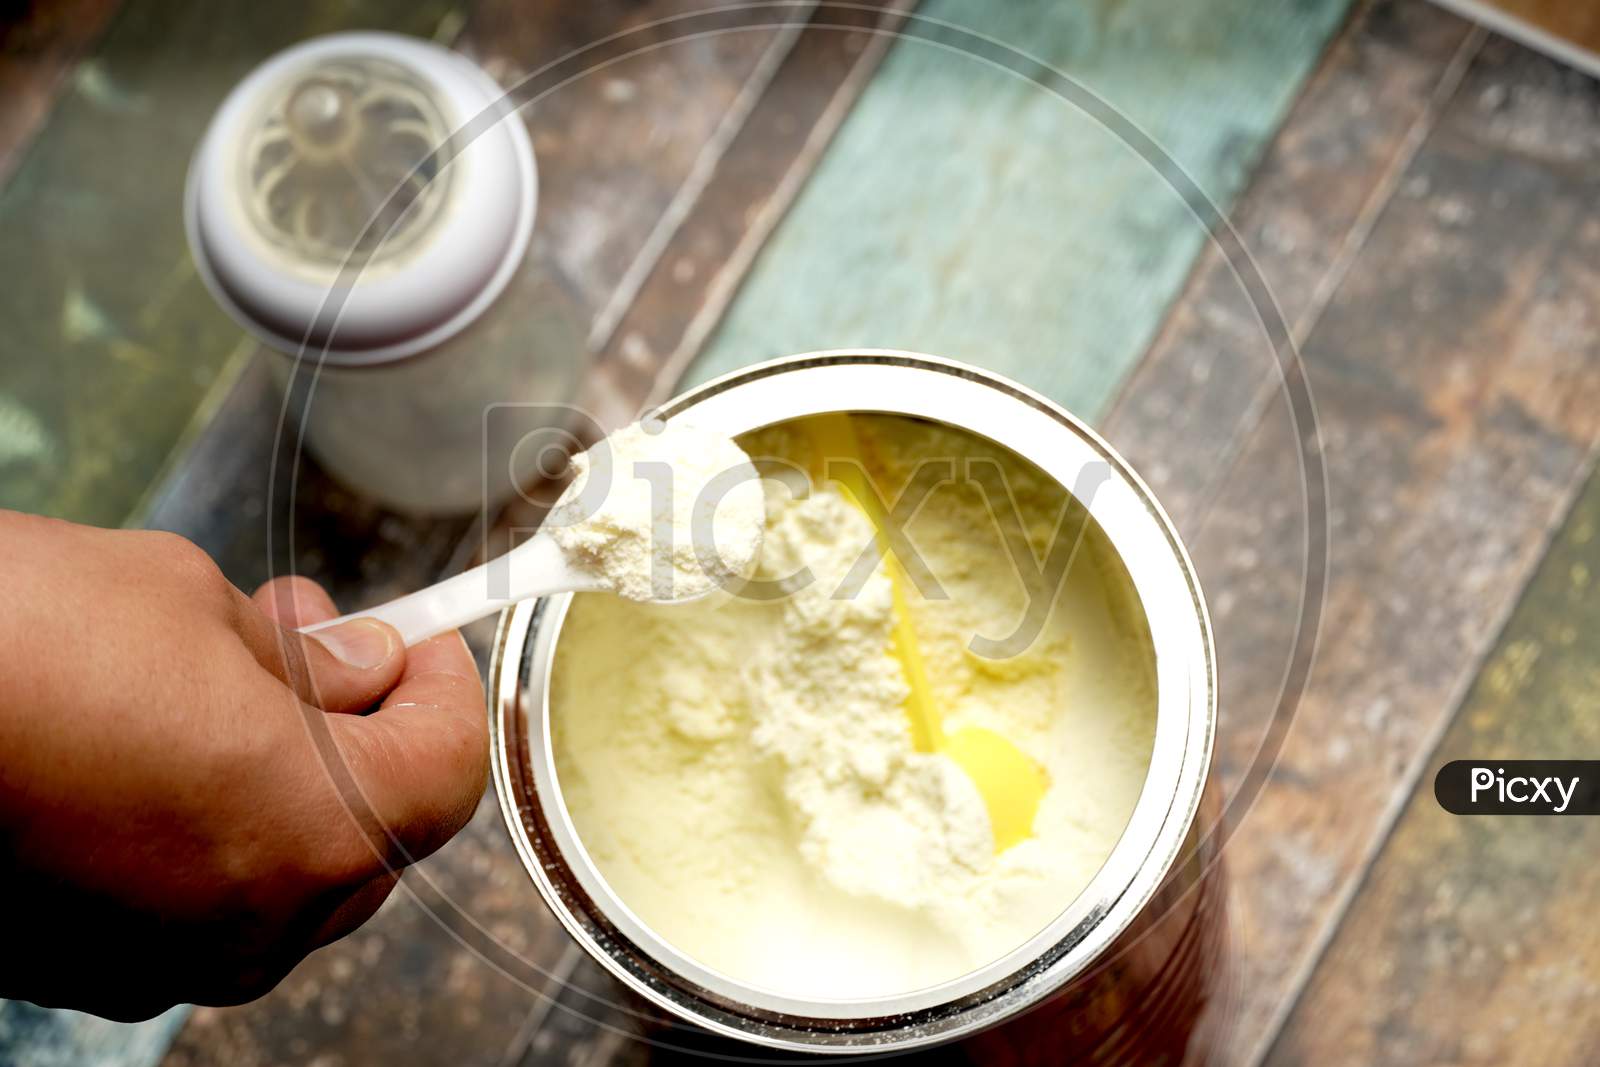 Man'S Hand Grabbing A Scoop Of Powdered Baby Milk Next To A Bottle On A Colorful Wooden Background.